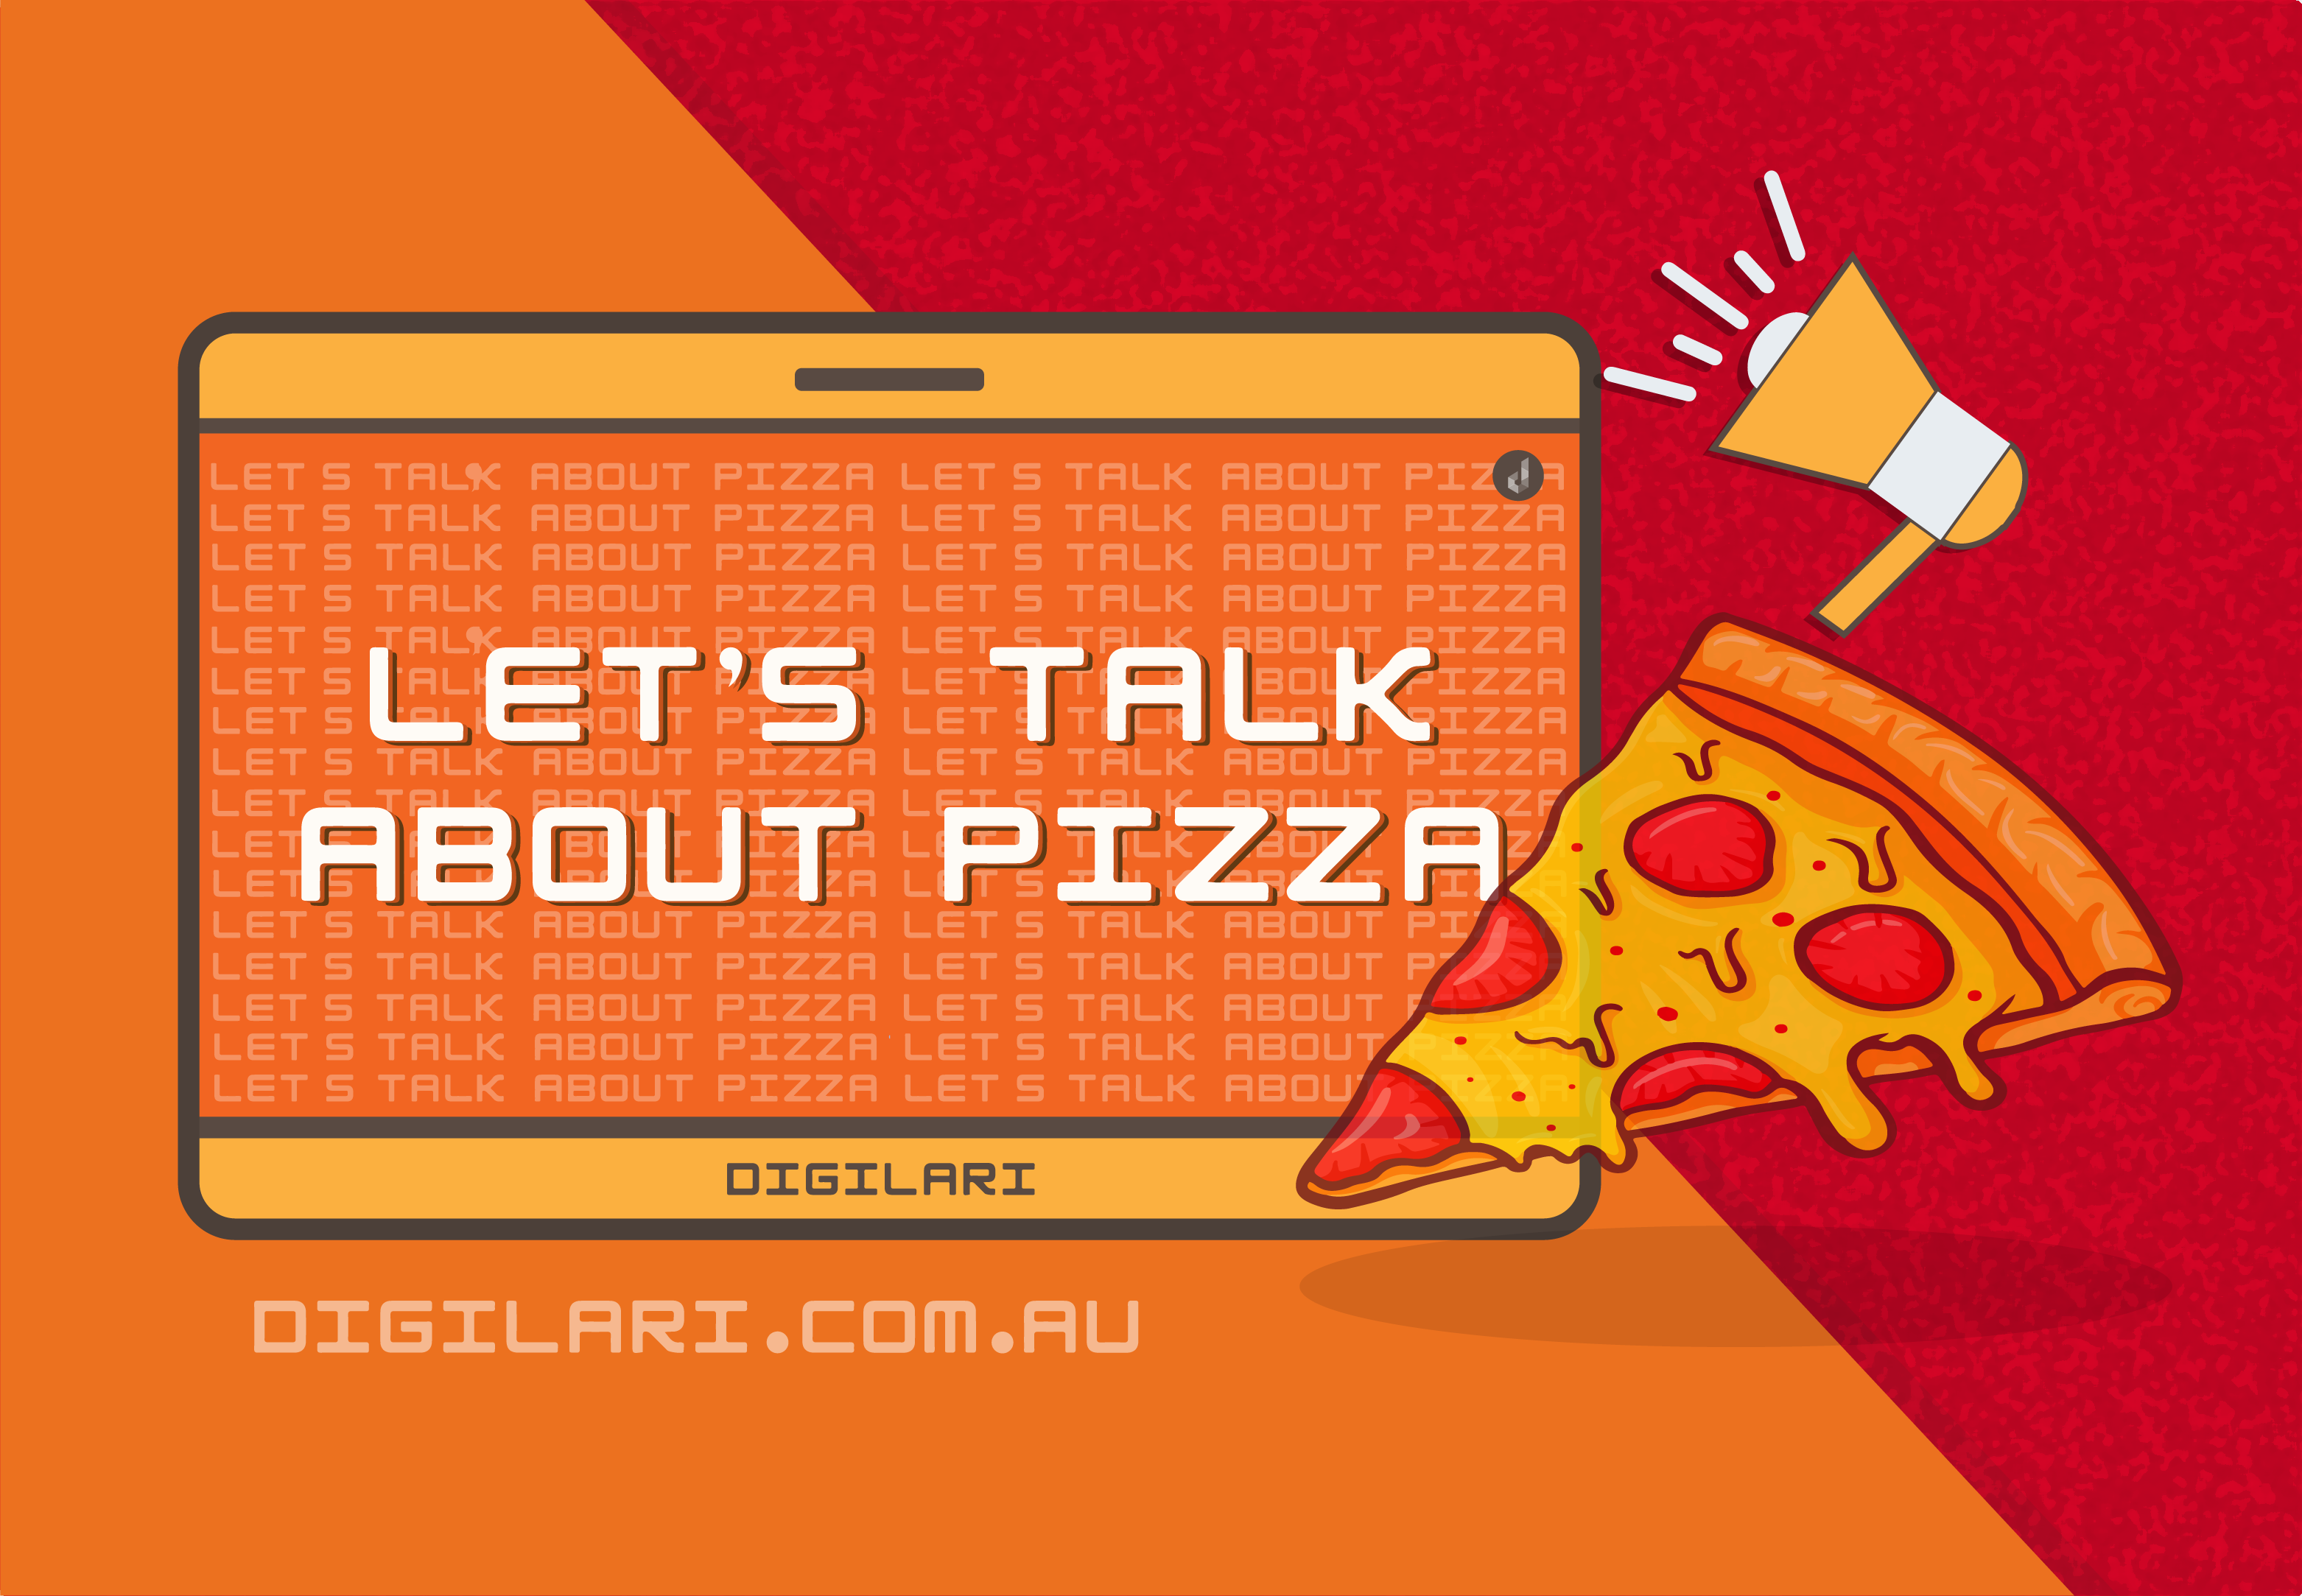 Let’s Talk About Pizza with Digital Marketing Strategy